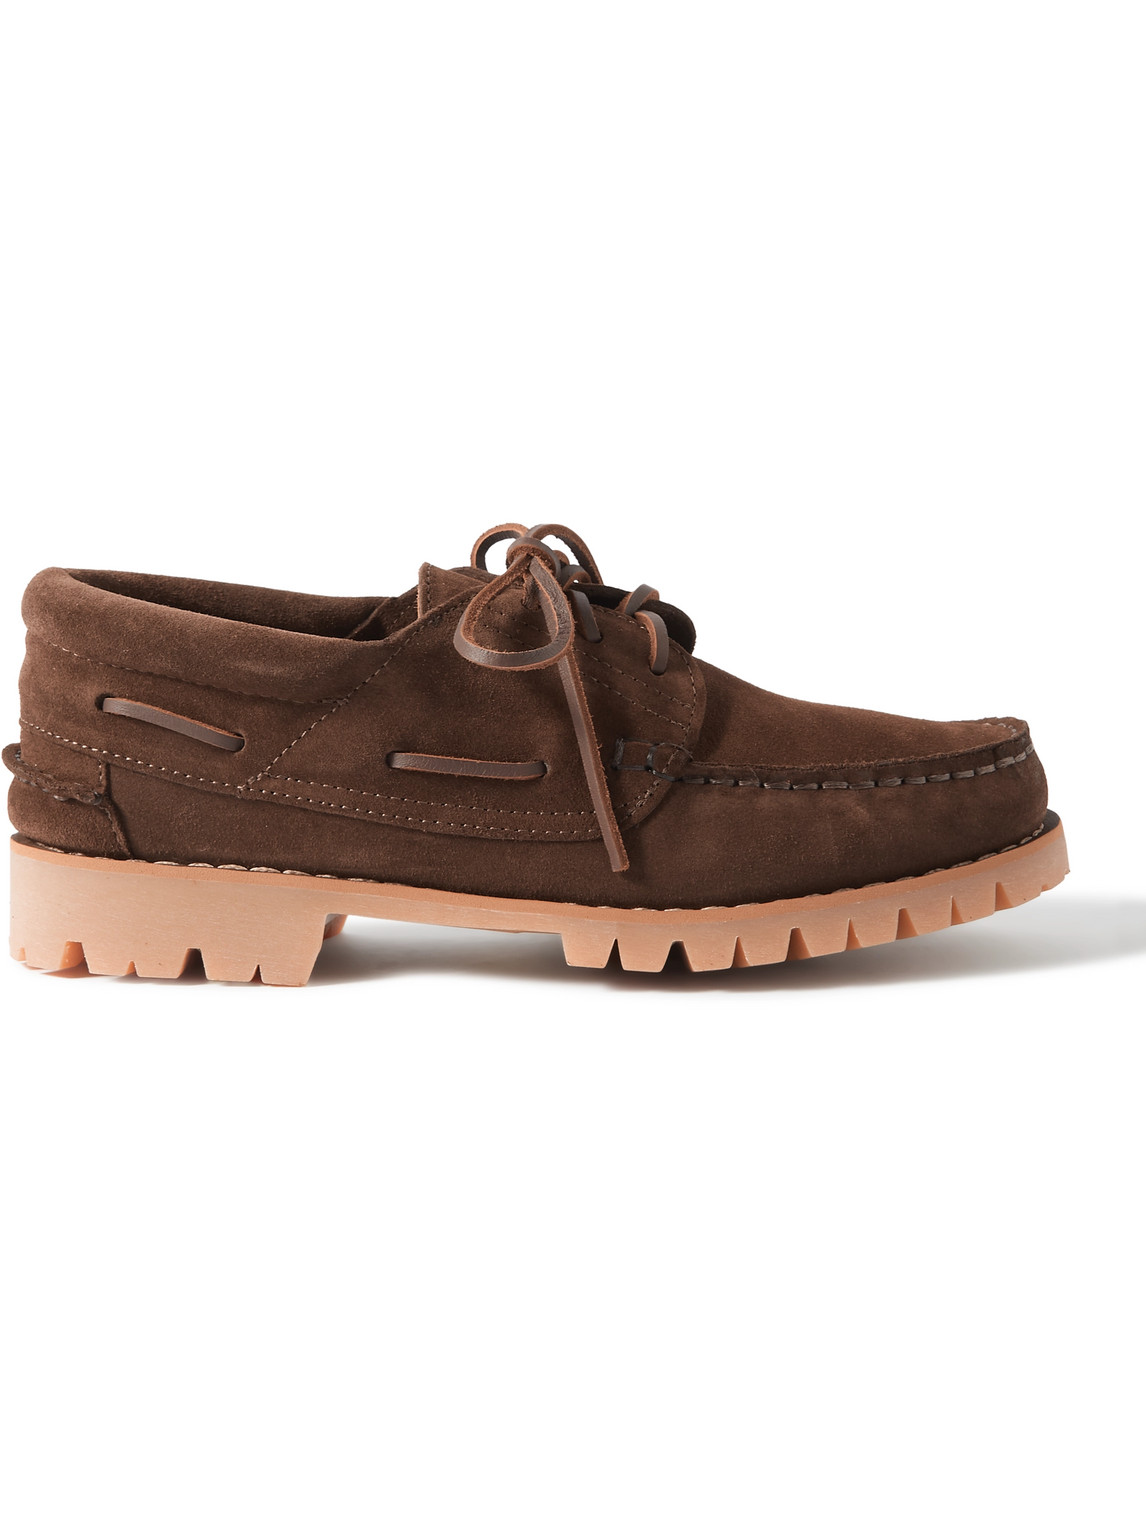 Mr P. Caspian Suede Boat Shoes In Brown